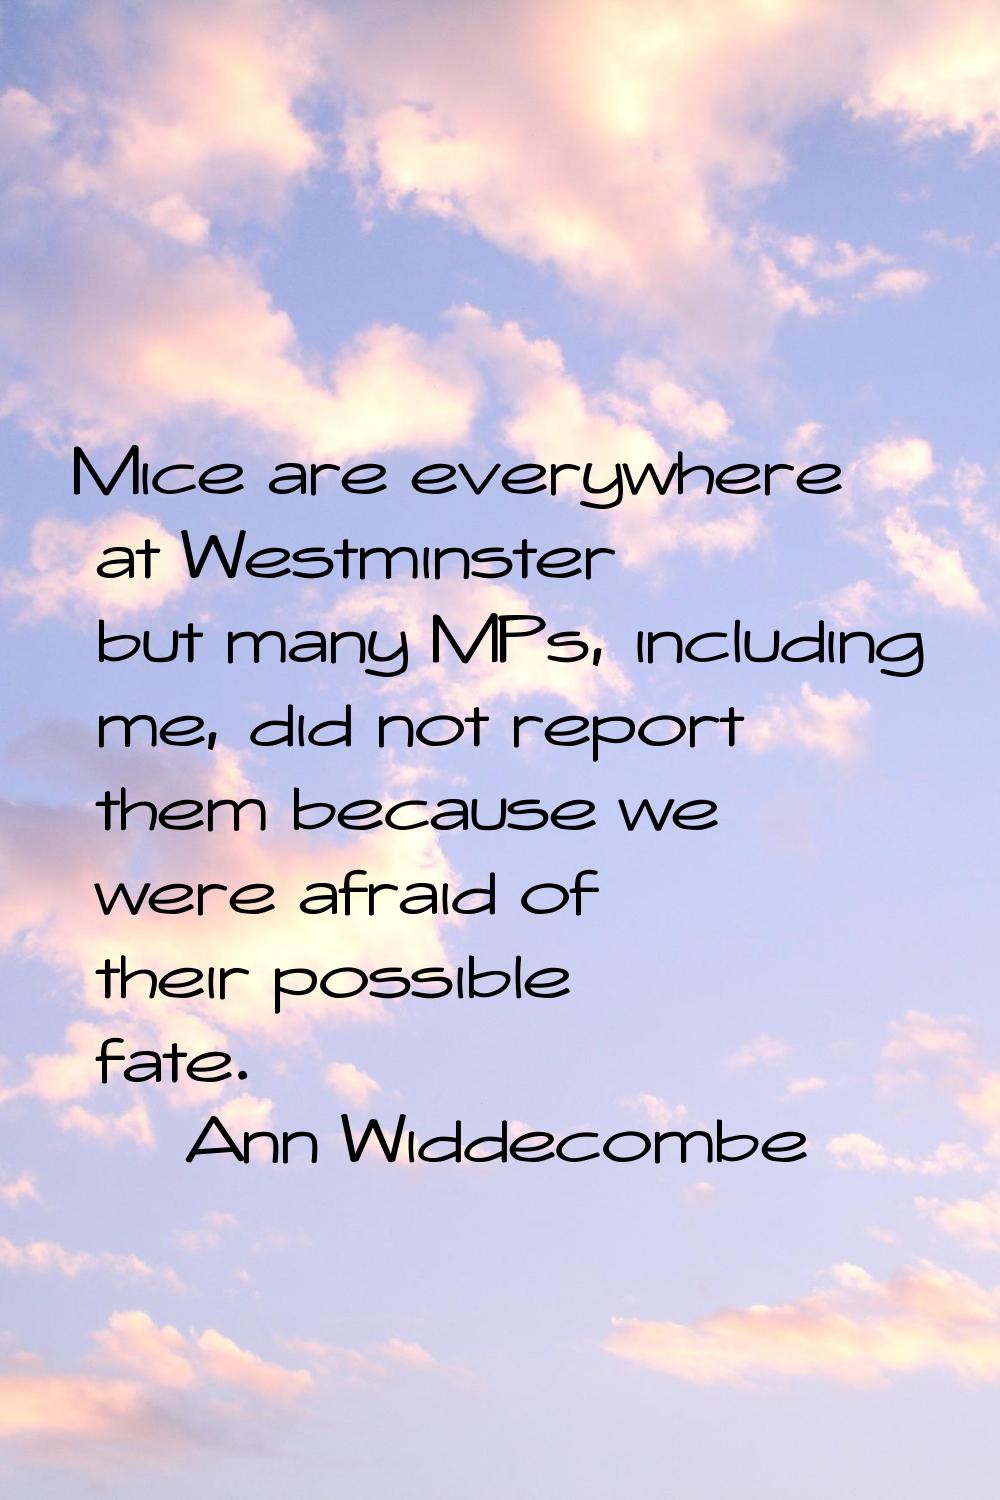 Mice are everywhere at Westminster but many MPs, including me, did not report them because we were 